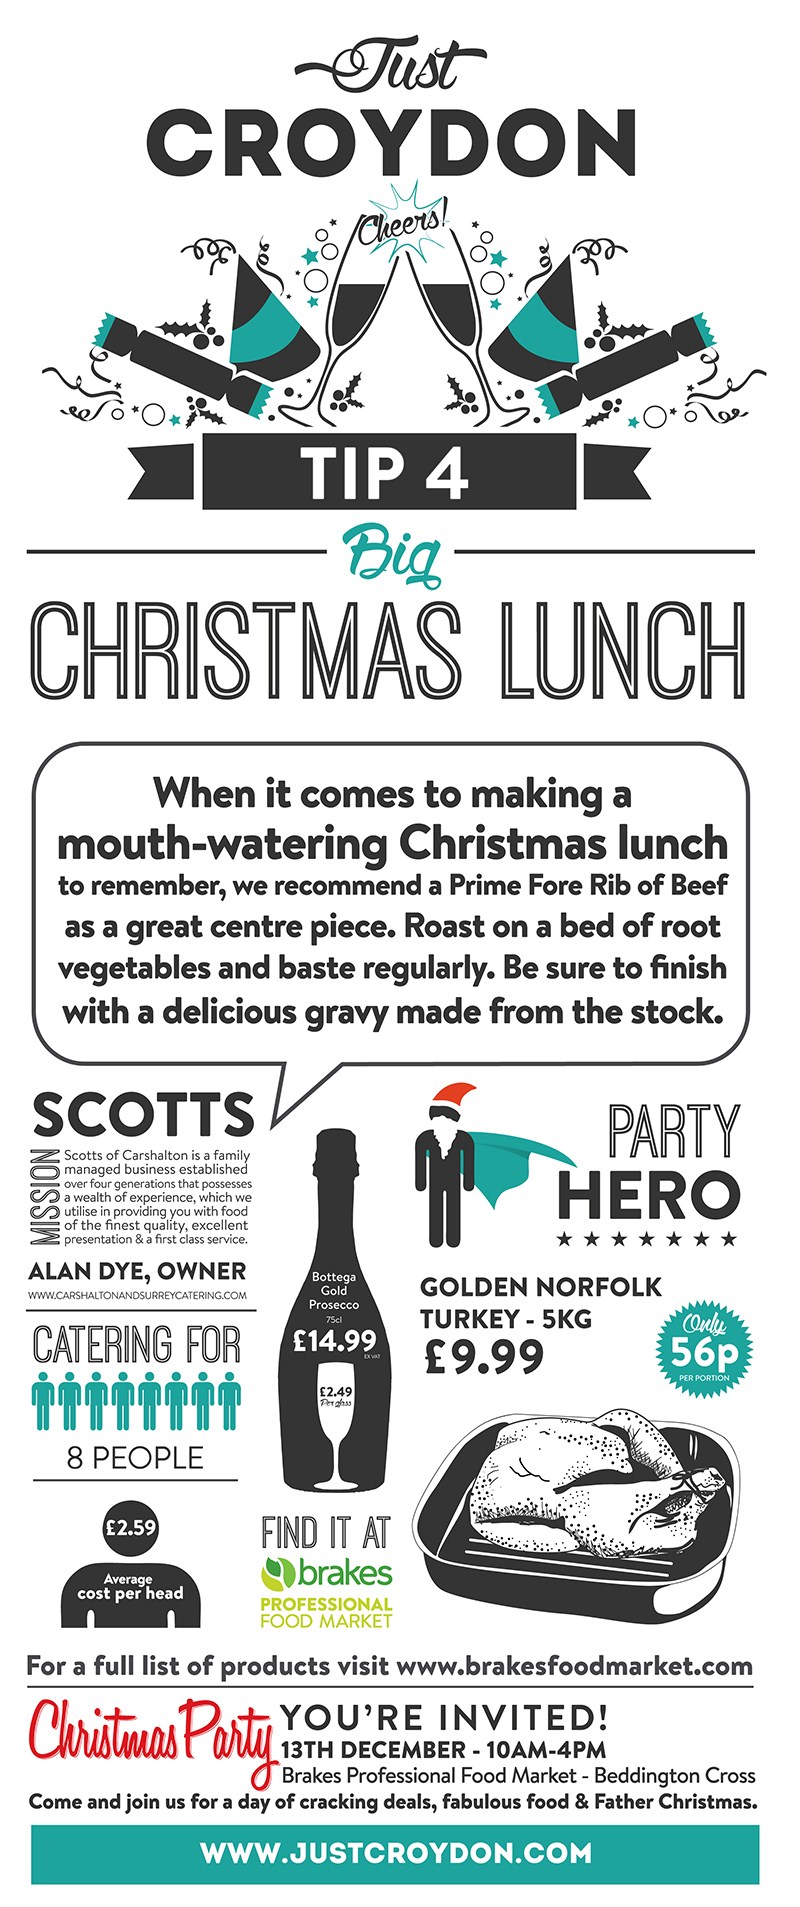 Party Tip 4: Big Christmas Lunch